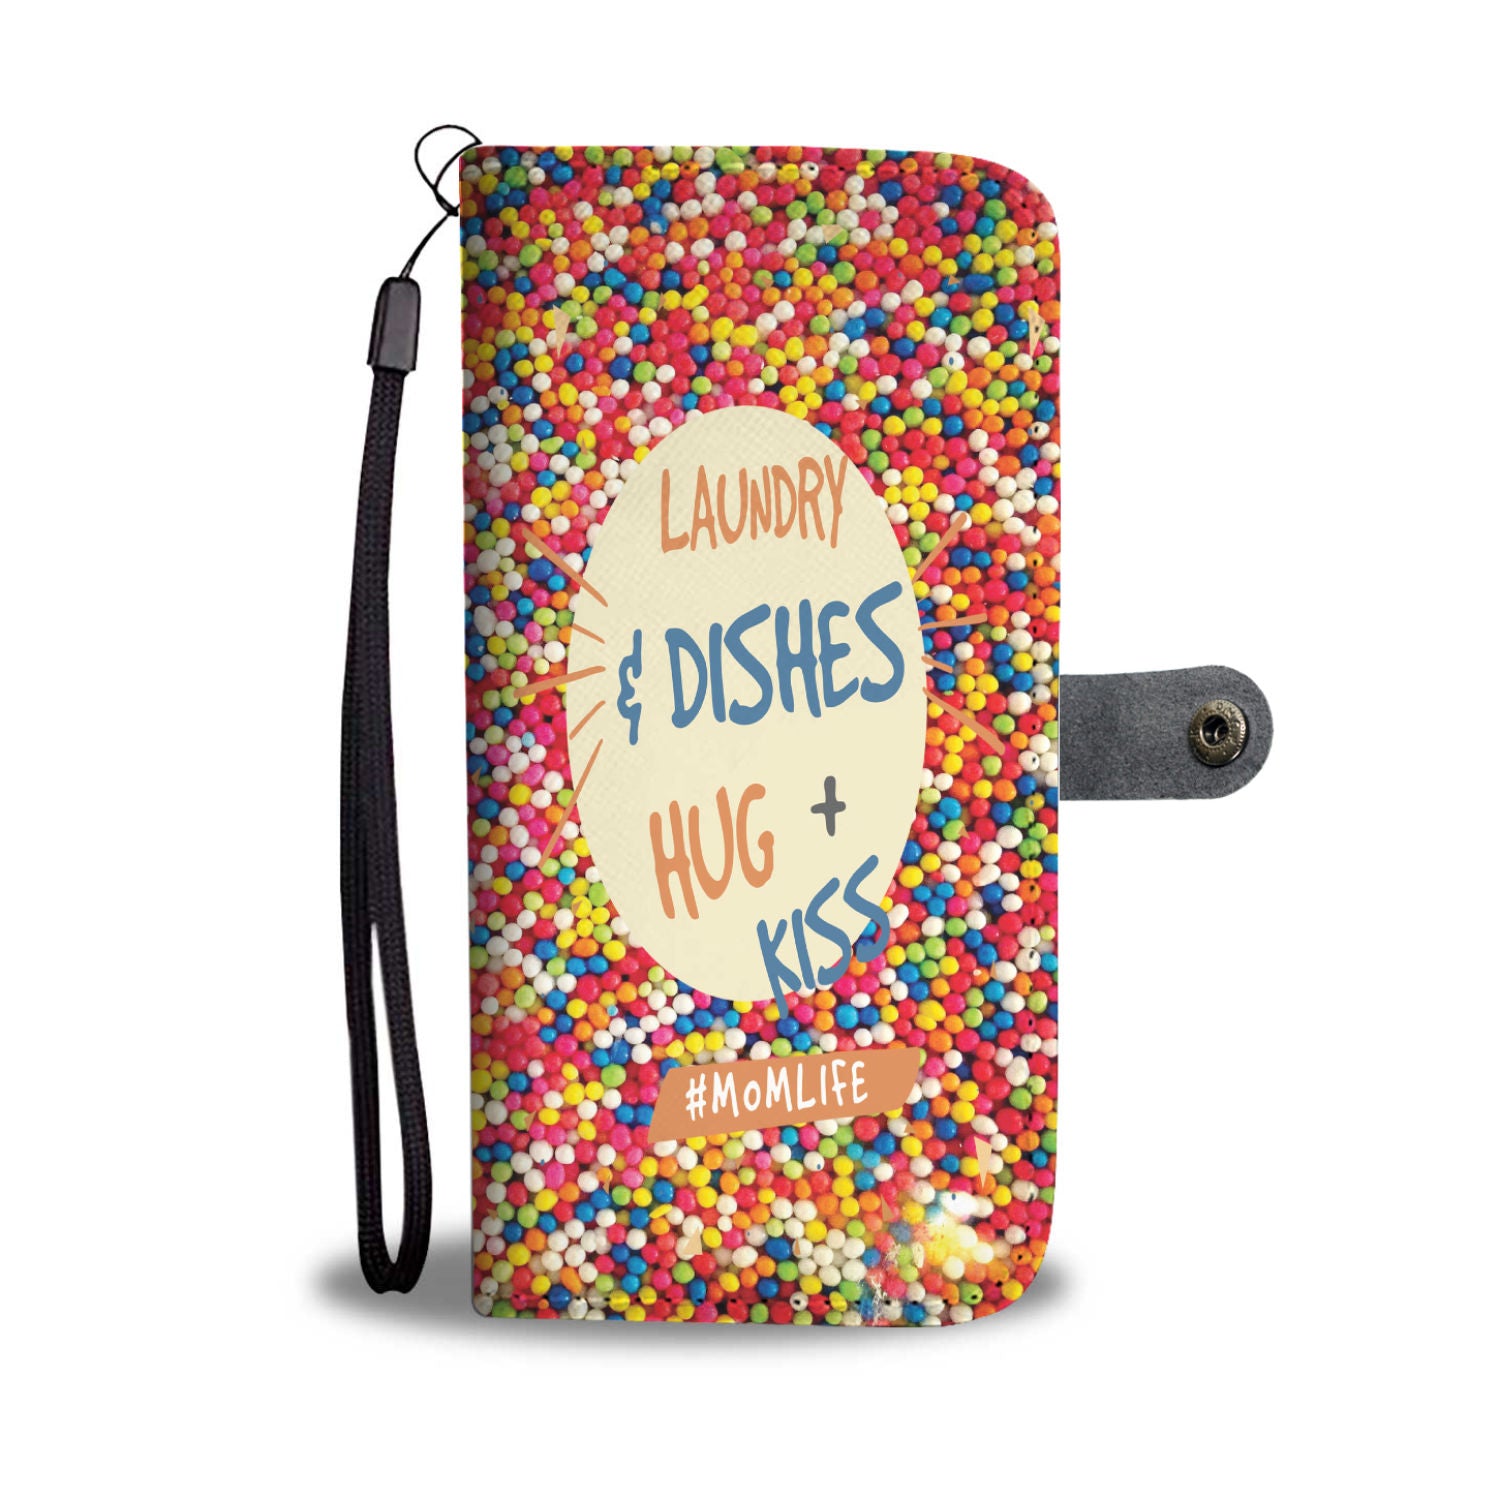 Custom Phone Wallet Available For All Phone Models Laundry And Dishes Hug + Kiss Phone Wallet